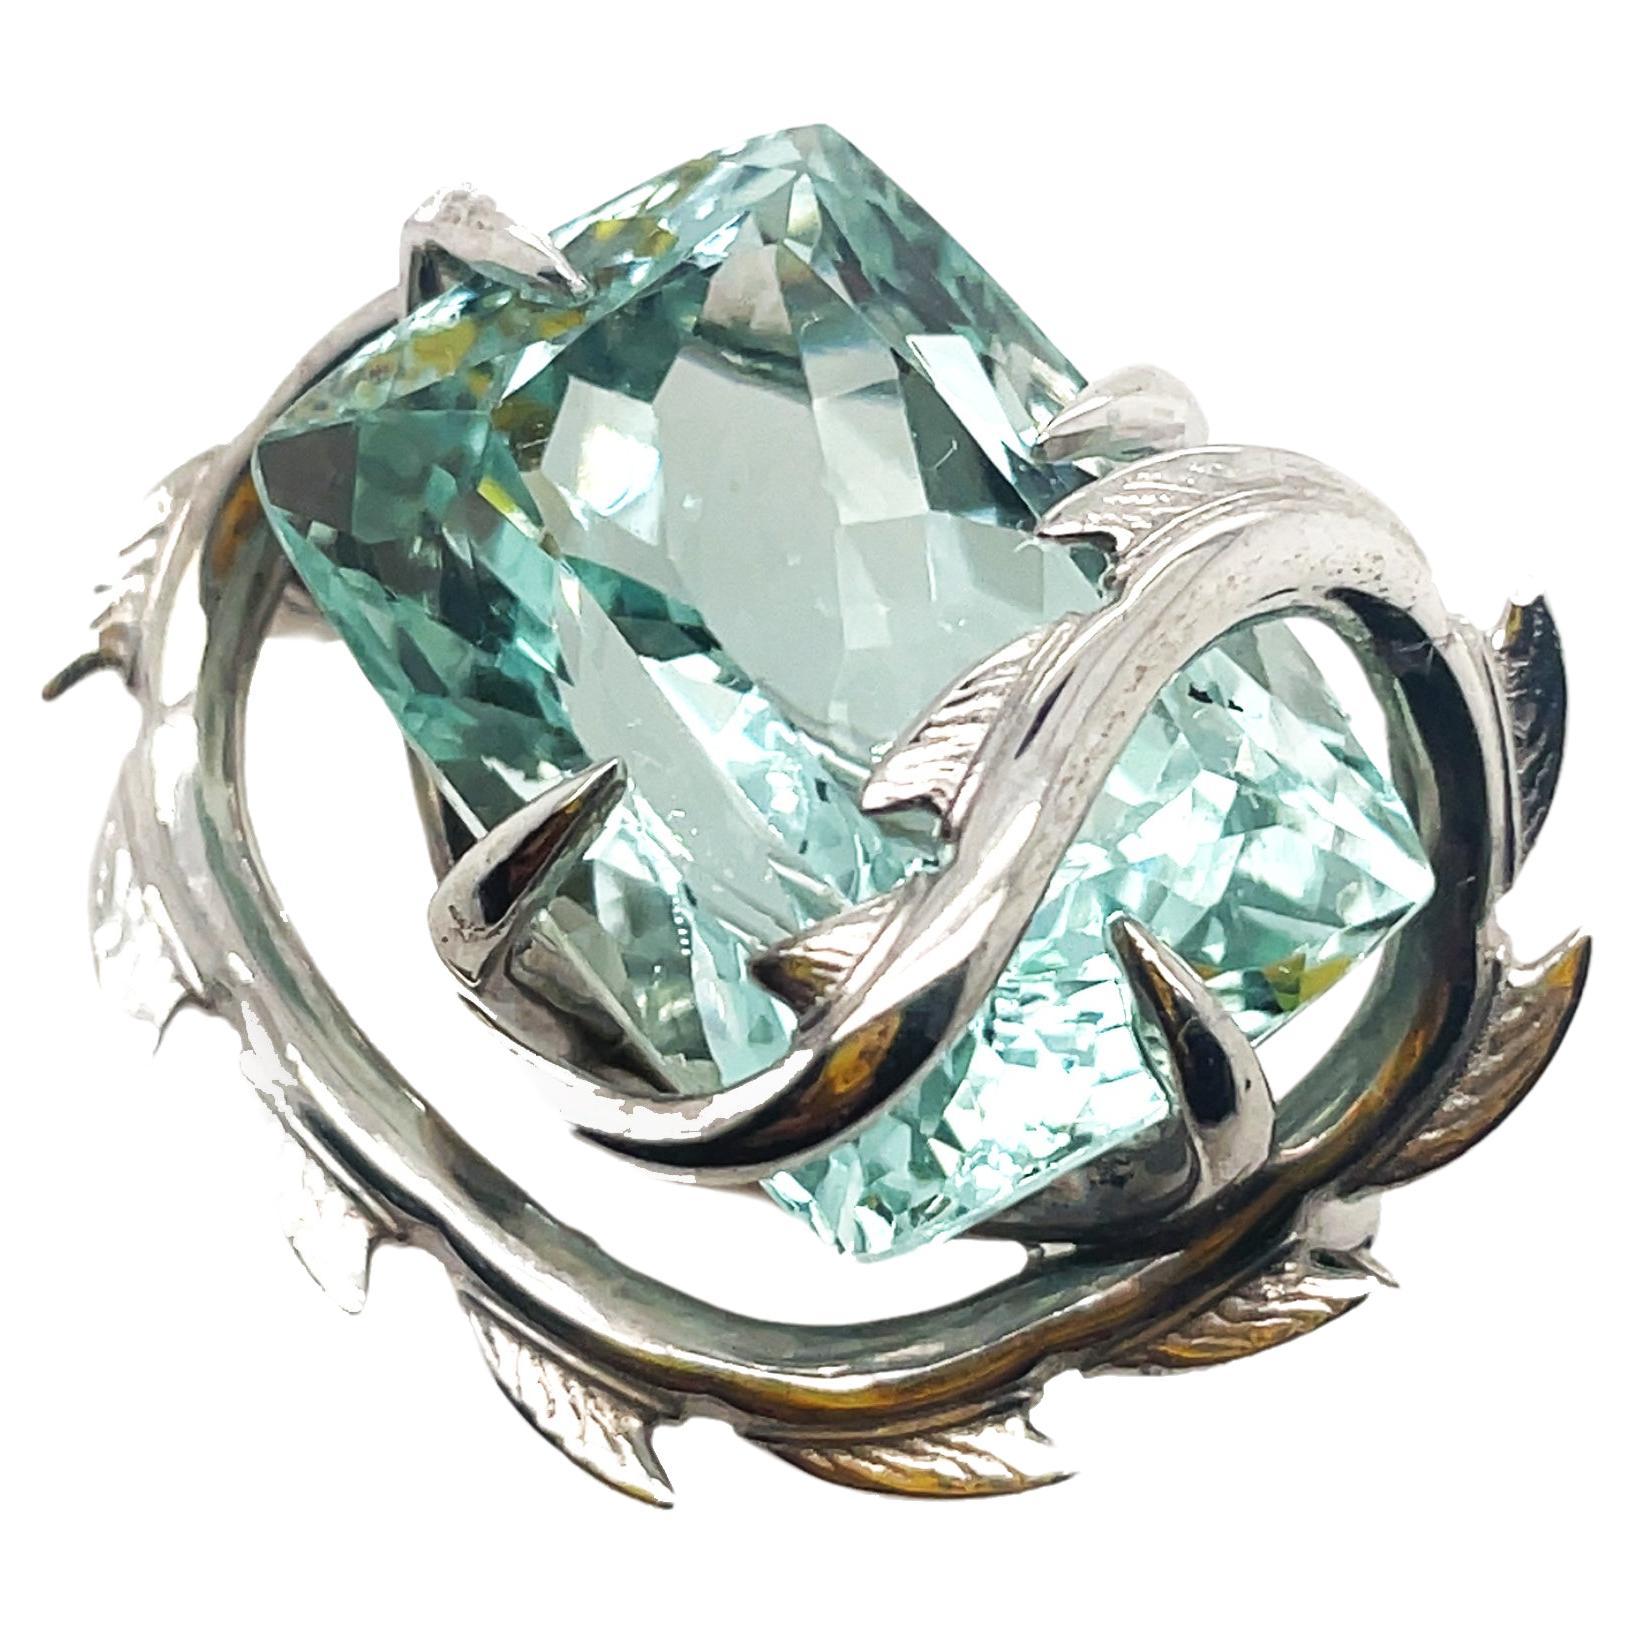 A seductive 30ct aquamarine, strangled by the powerful 18ct white gold croc tail. The gently overlapping scales create a structure that echoes the Australian saltwater crocs' armour. Featuring our signature croc filagree on the inside, this one of a